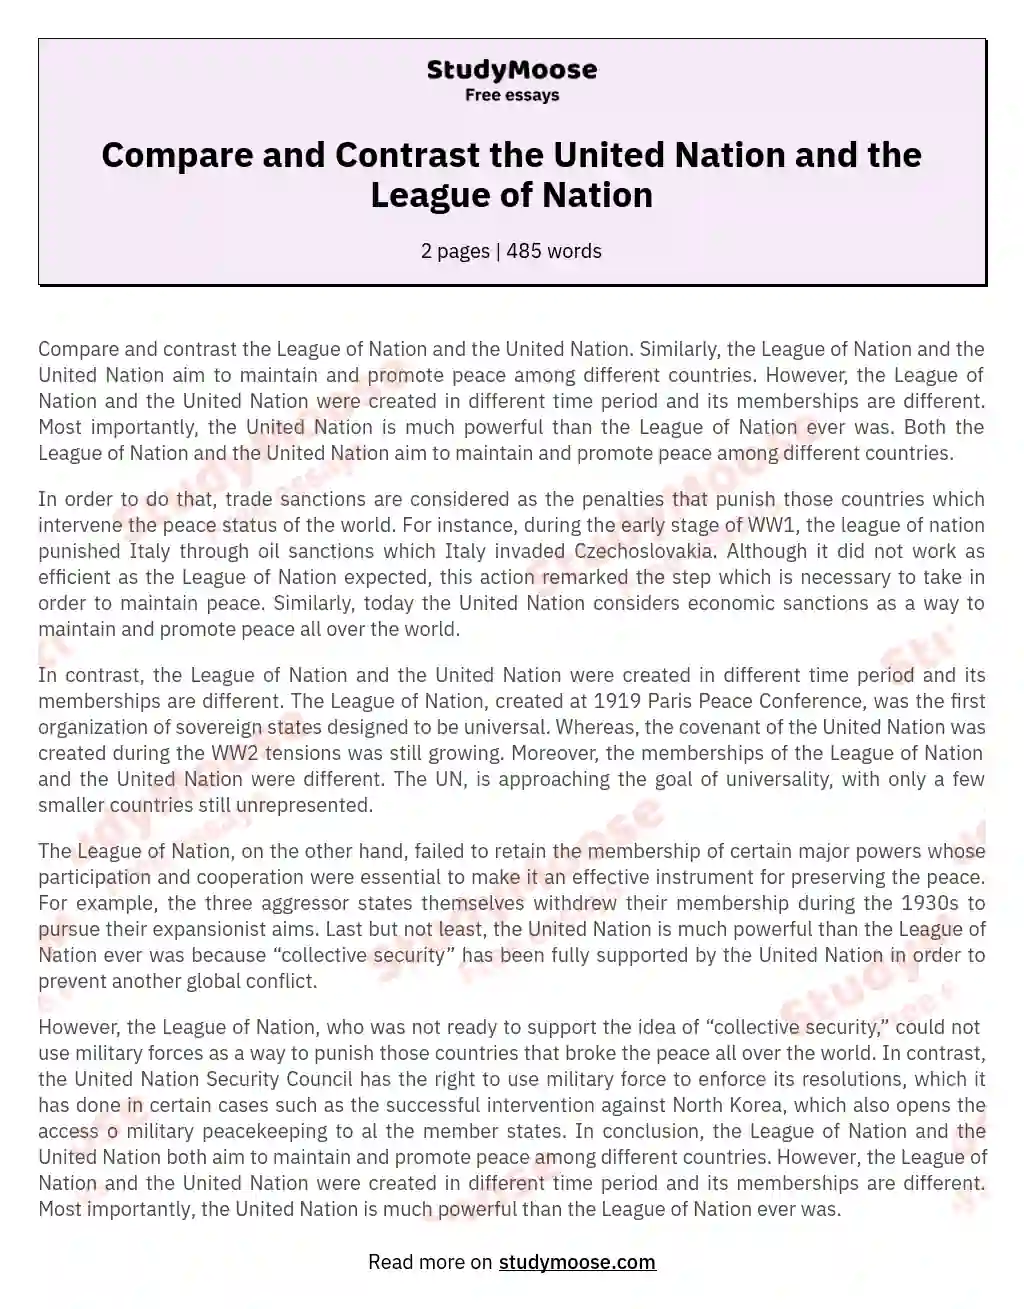 Compare and Contrast the United Nation and the League of Nation essay